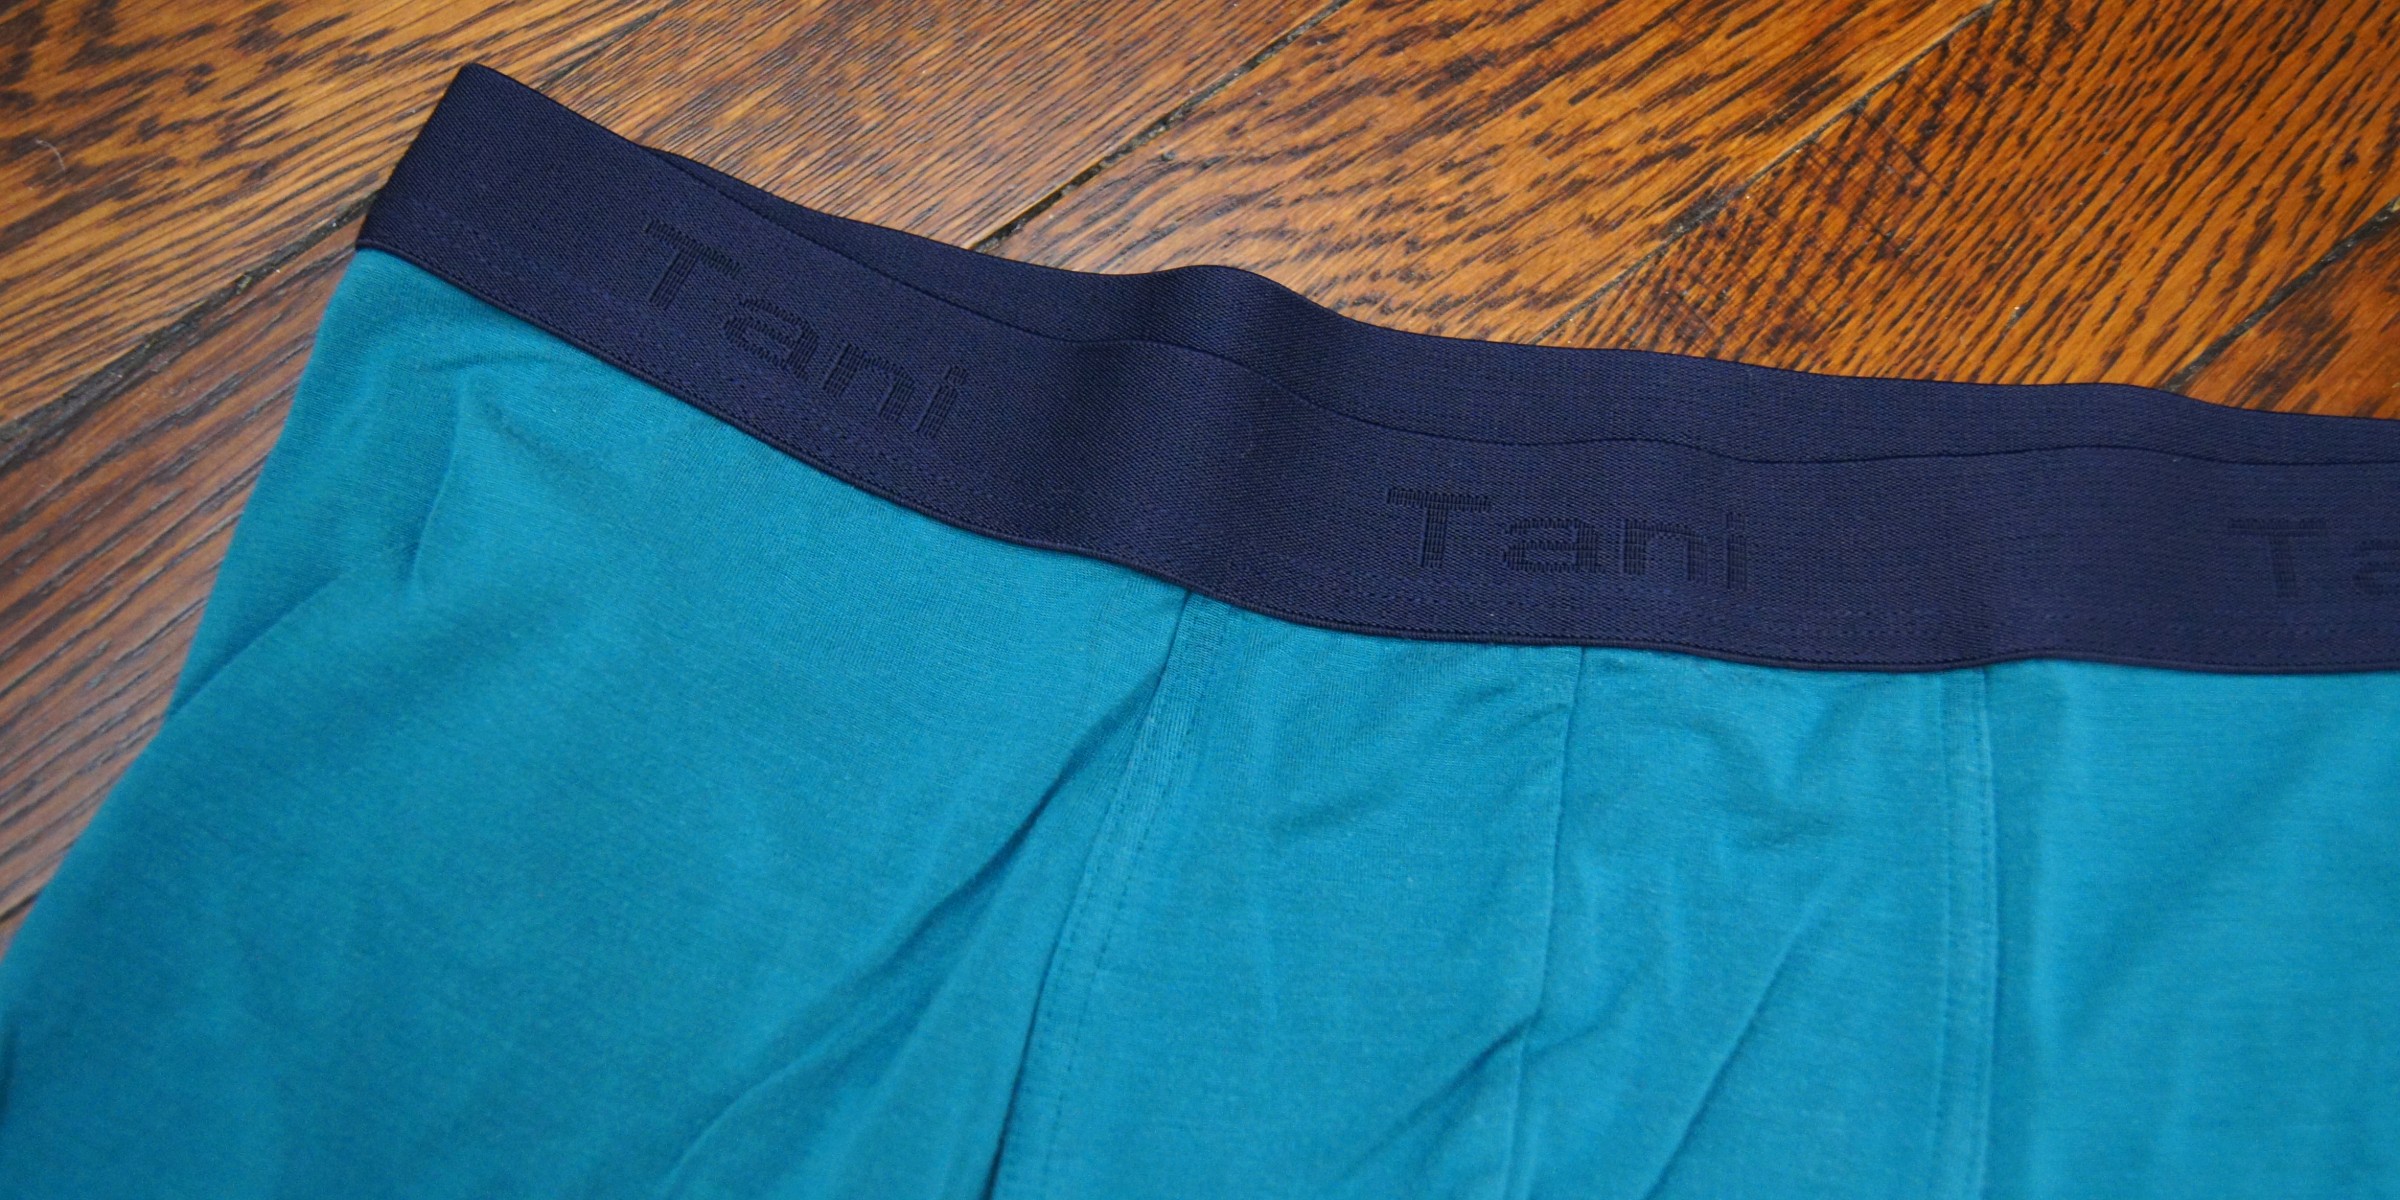 The Luxurious Tani Underwear In Review